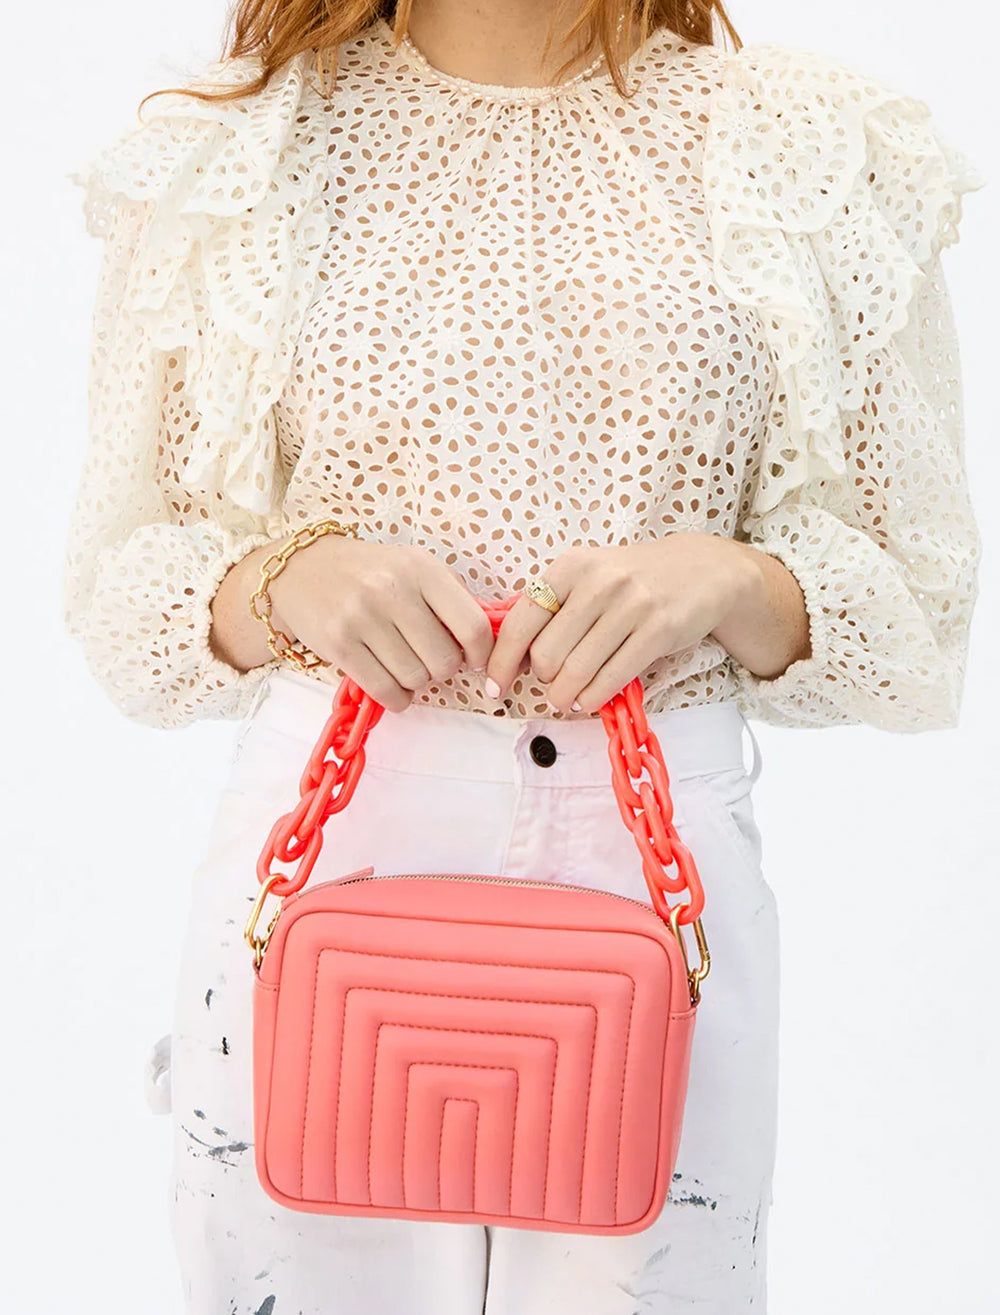 Model holding Clare V.'s shortie strap in bright coral attached to a bag.